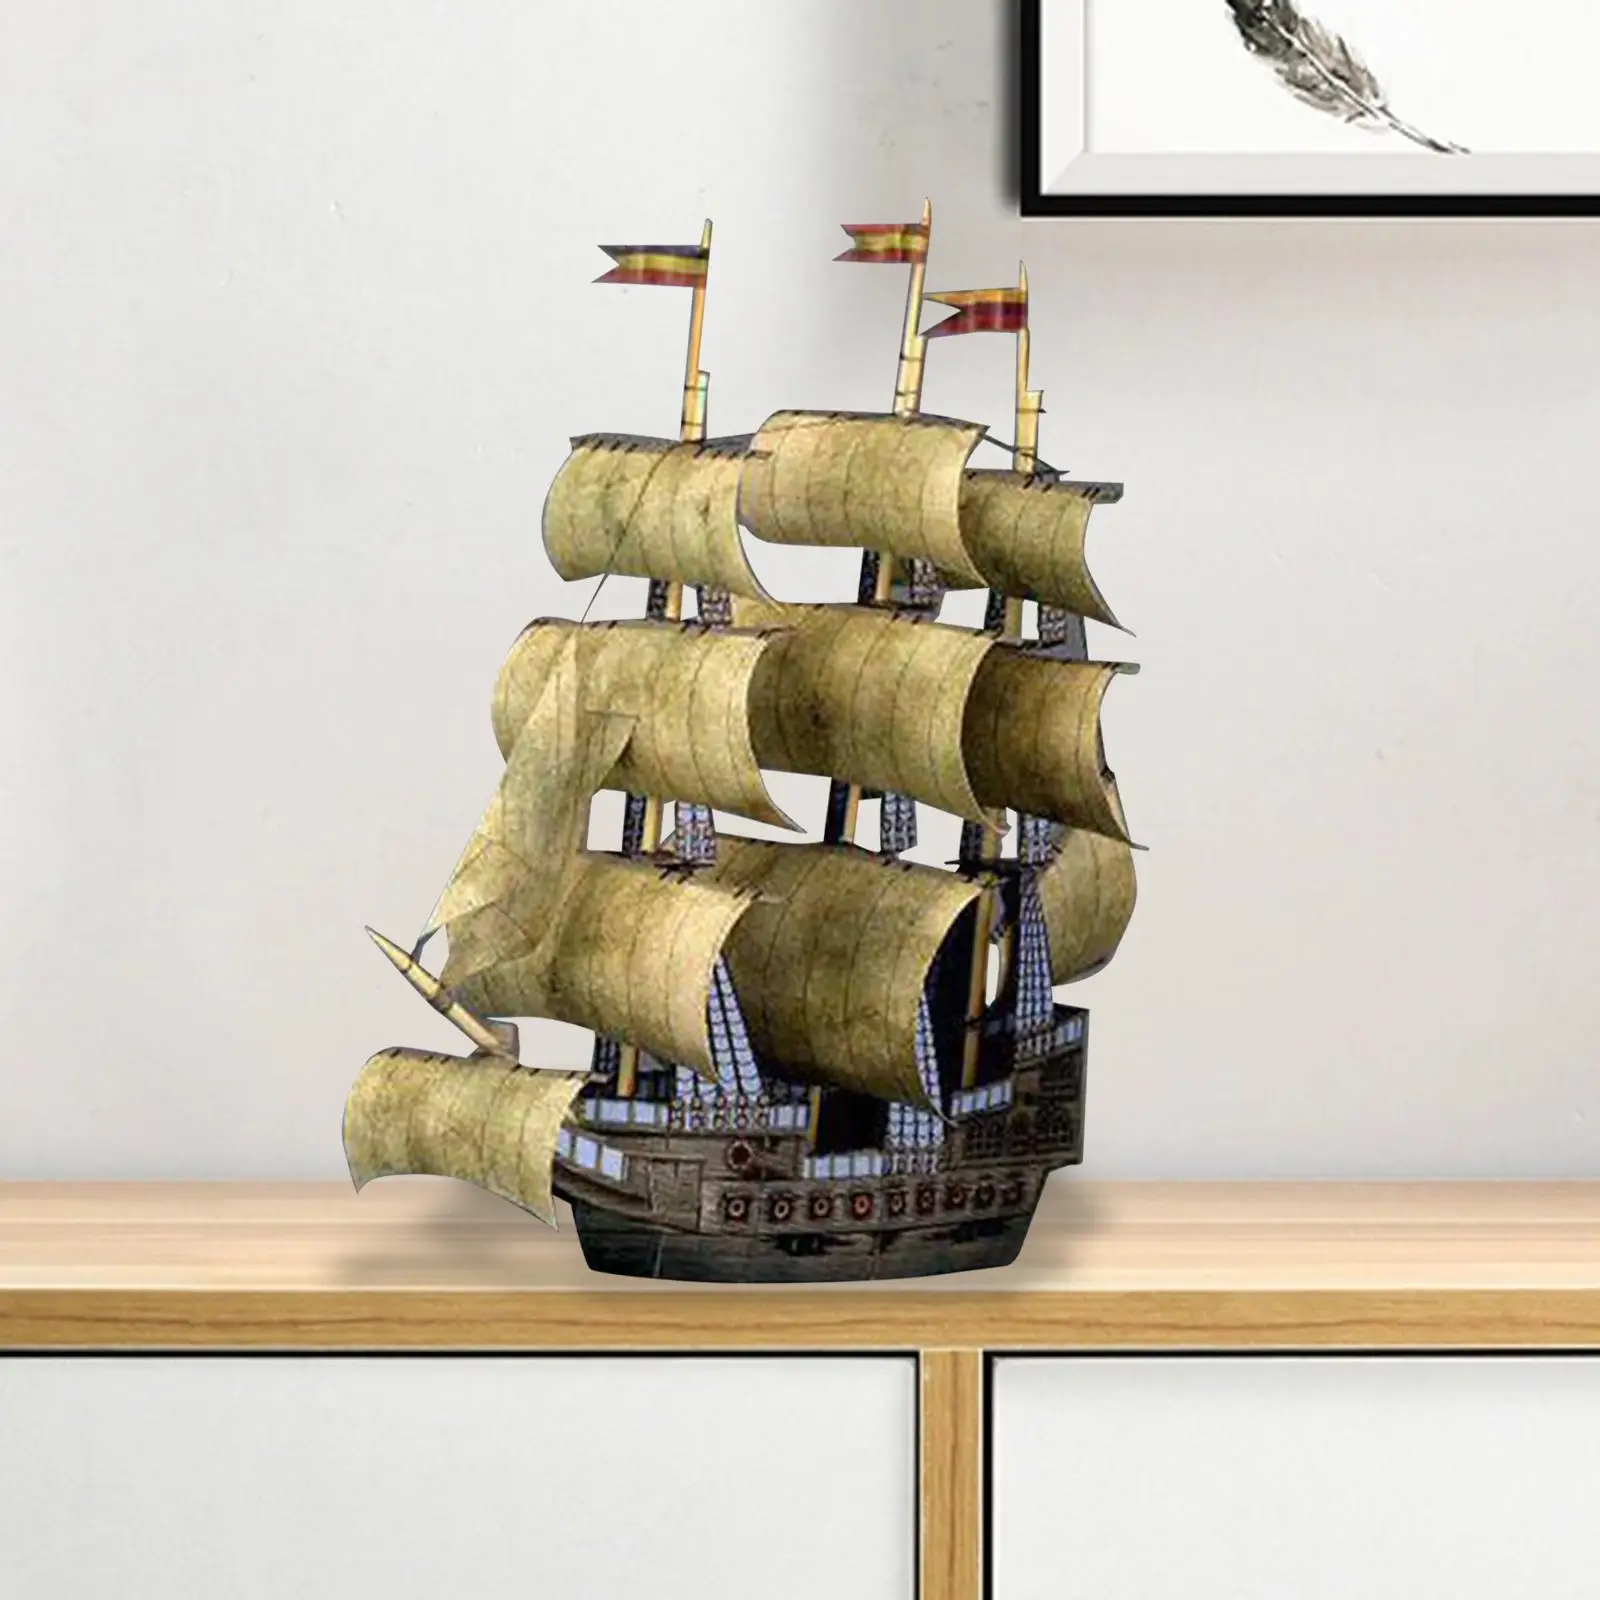 DIY Paper Ship Papercraft DIY Assemble Toy Sailboat Ship Kits 1:250 Scale for Kids Children Adults Home Decoration Boys